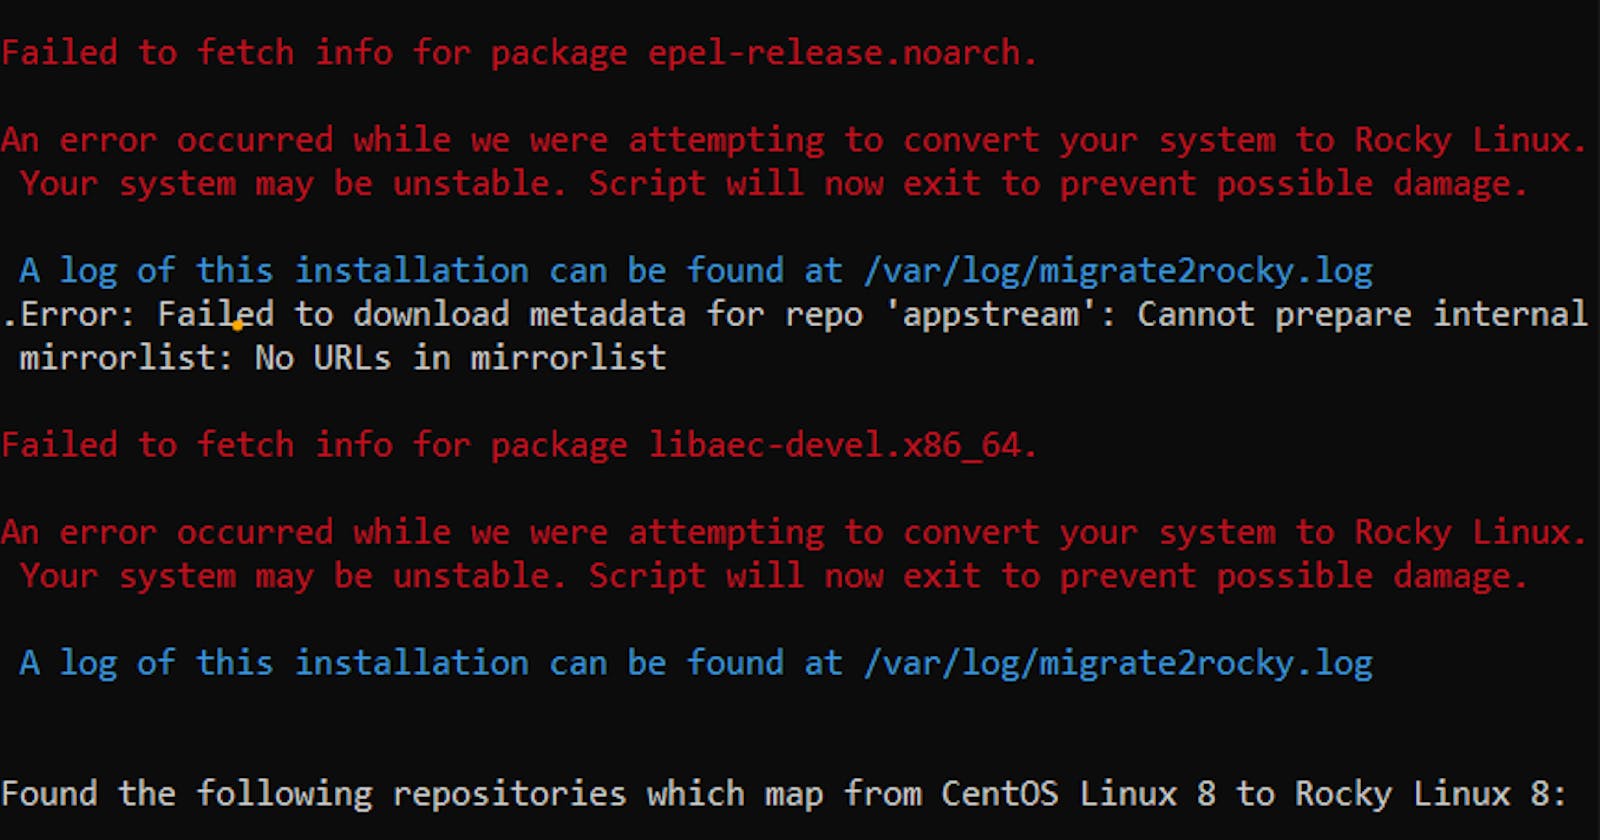 Stuck Trying to Migrate from CentOS Linux to Rocky Linux after EOL?